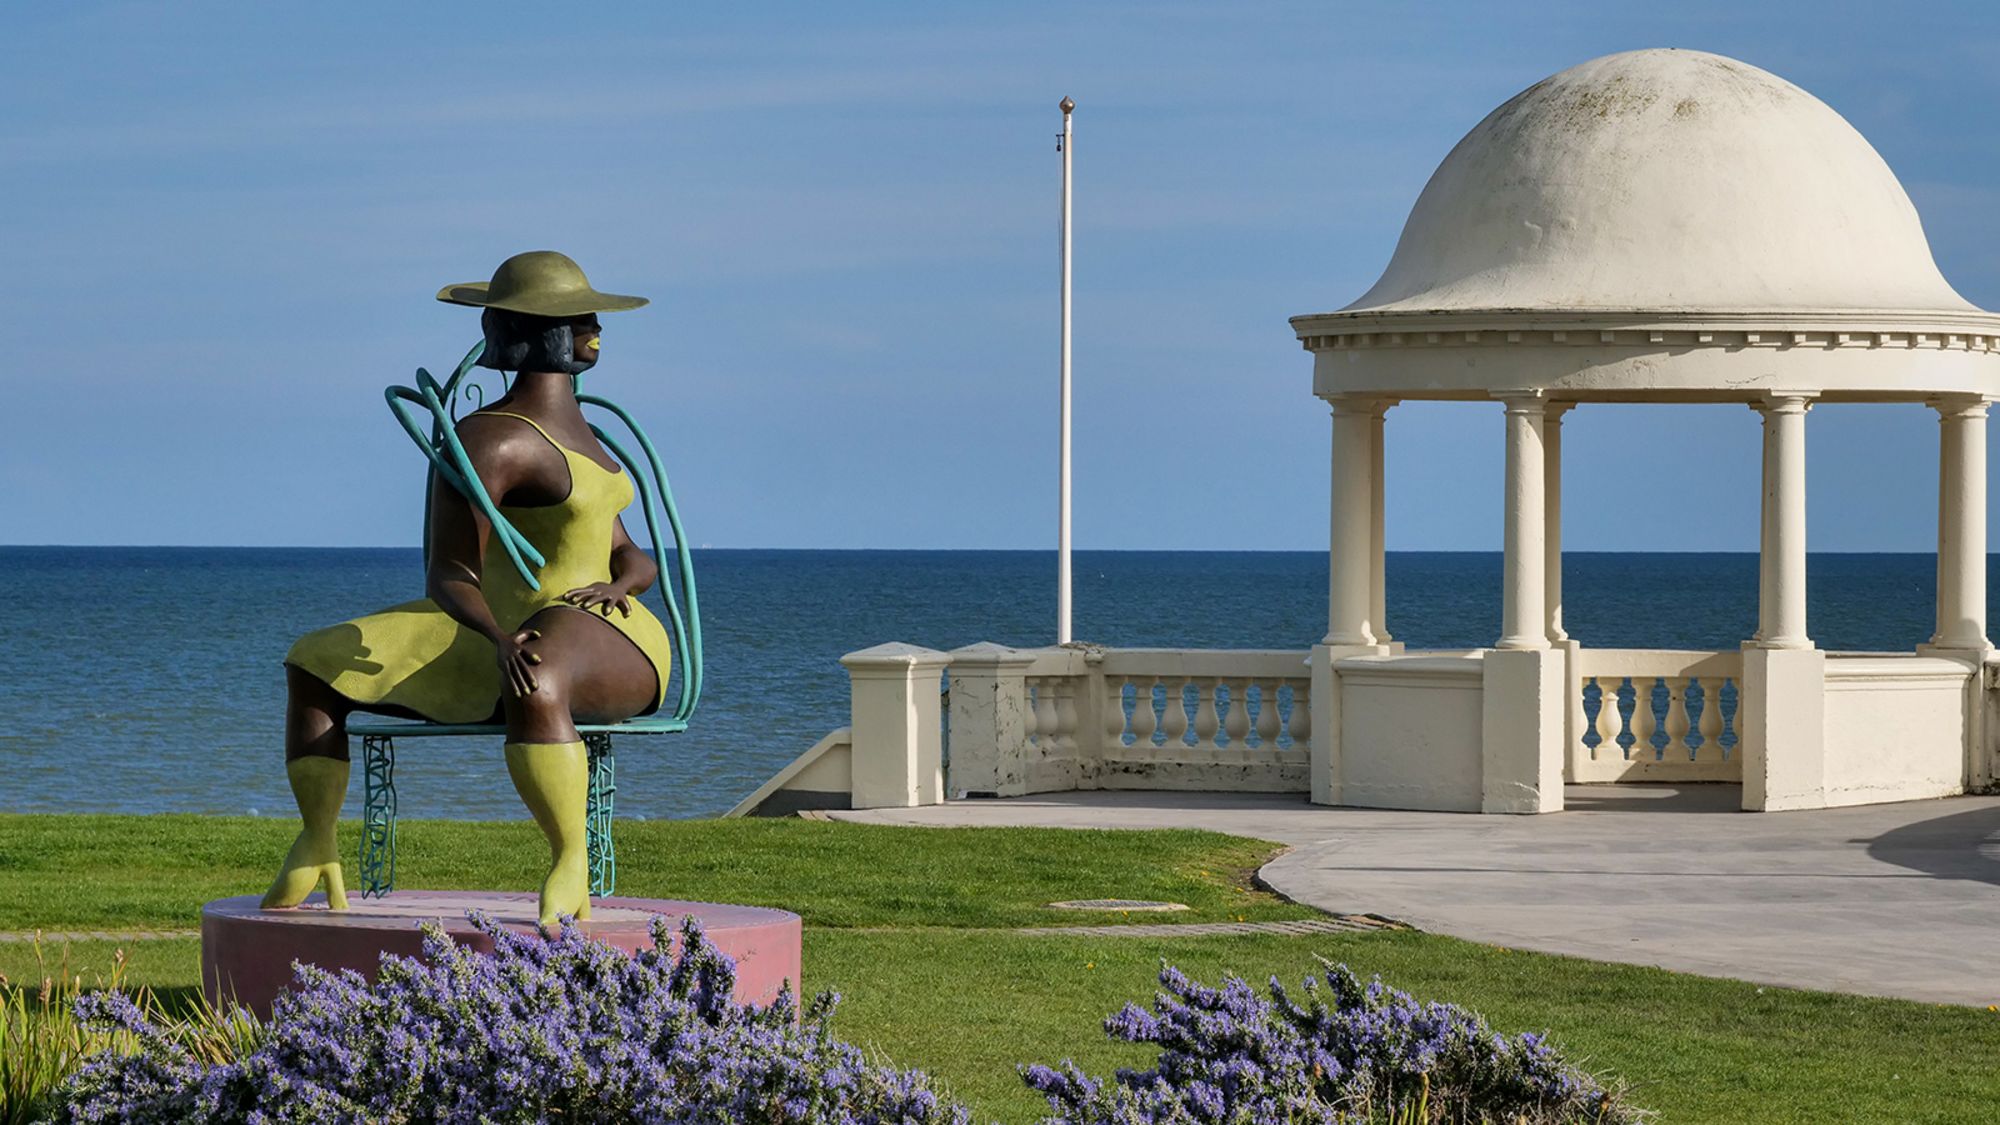 Tschabalala Self's "Seated," installed in Bexhill-on-Sea, UK